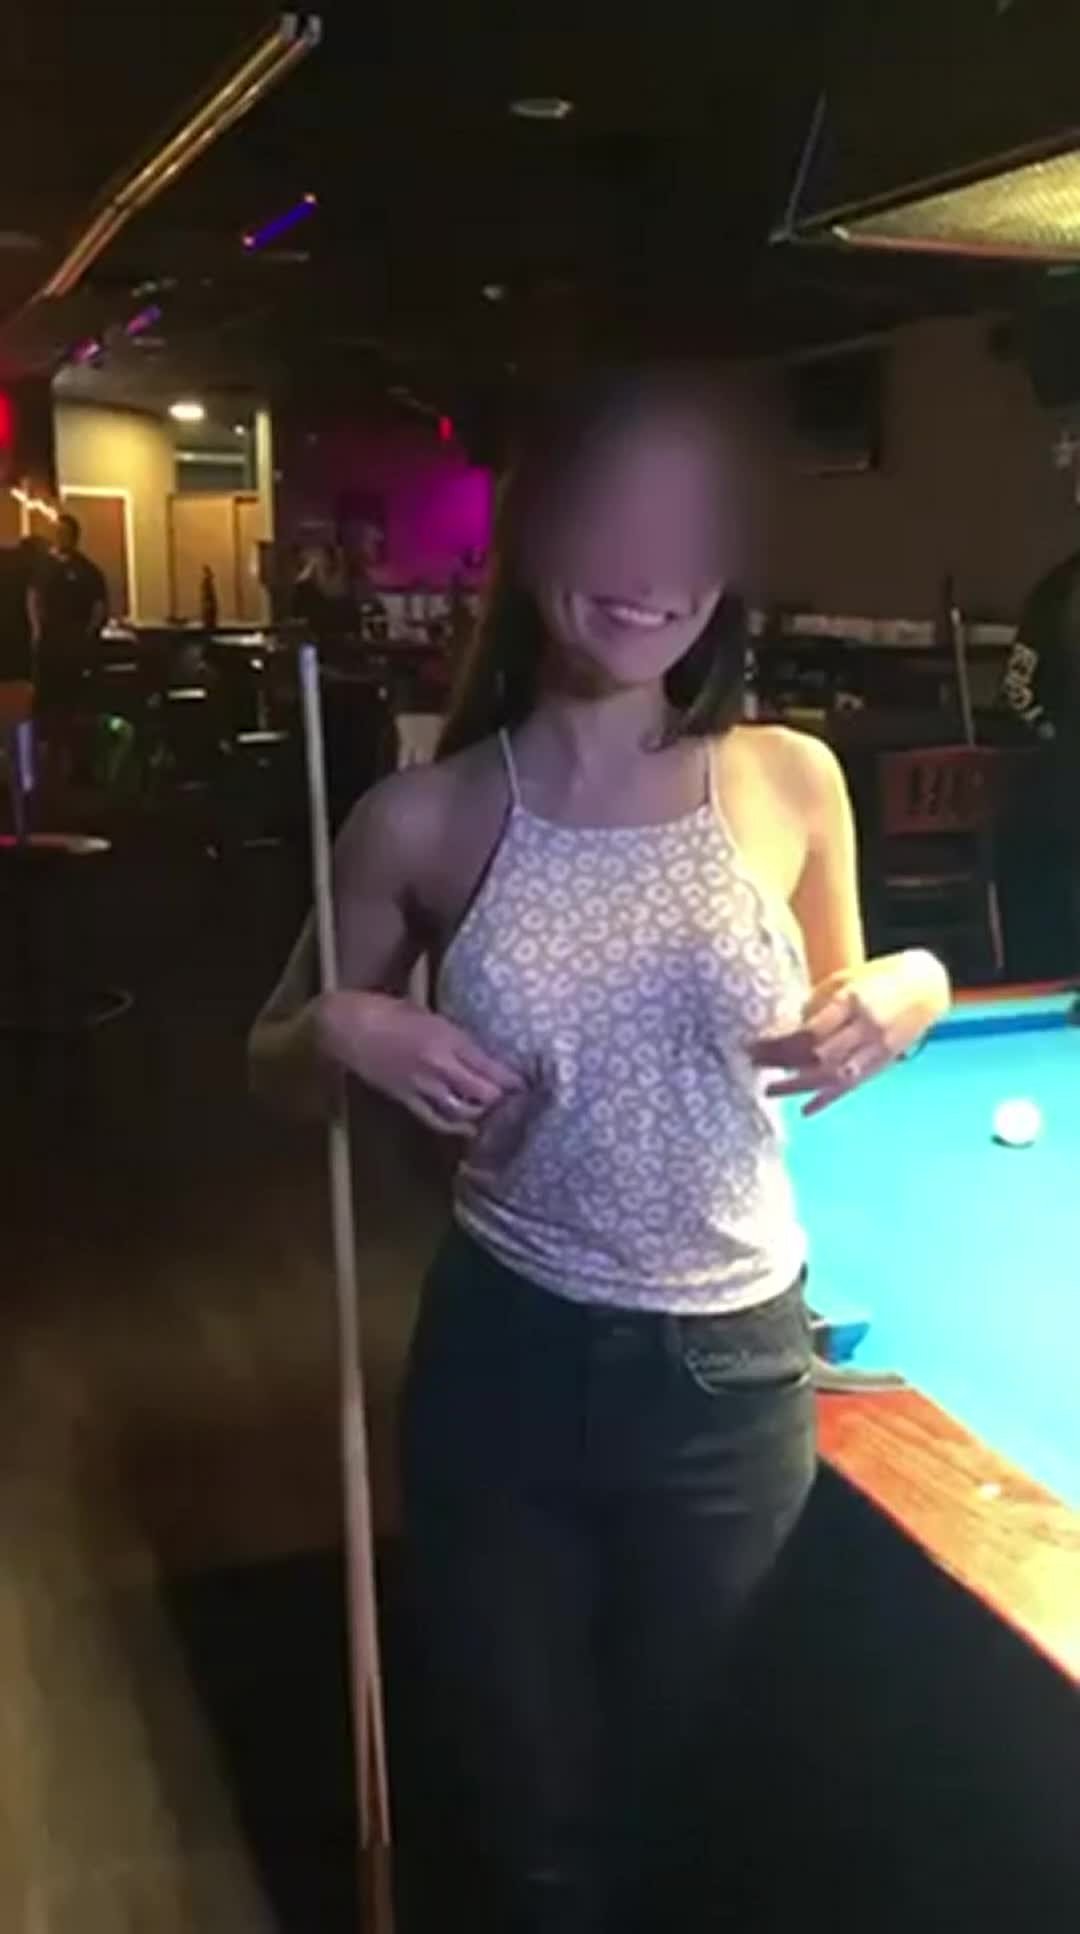 Video post by WhoreApril